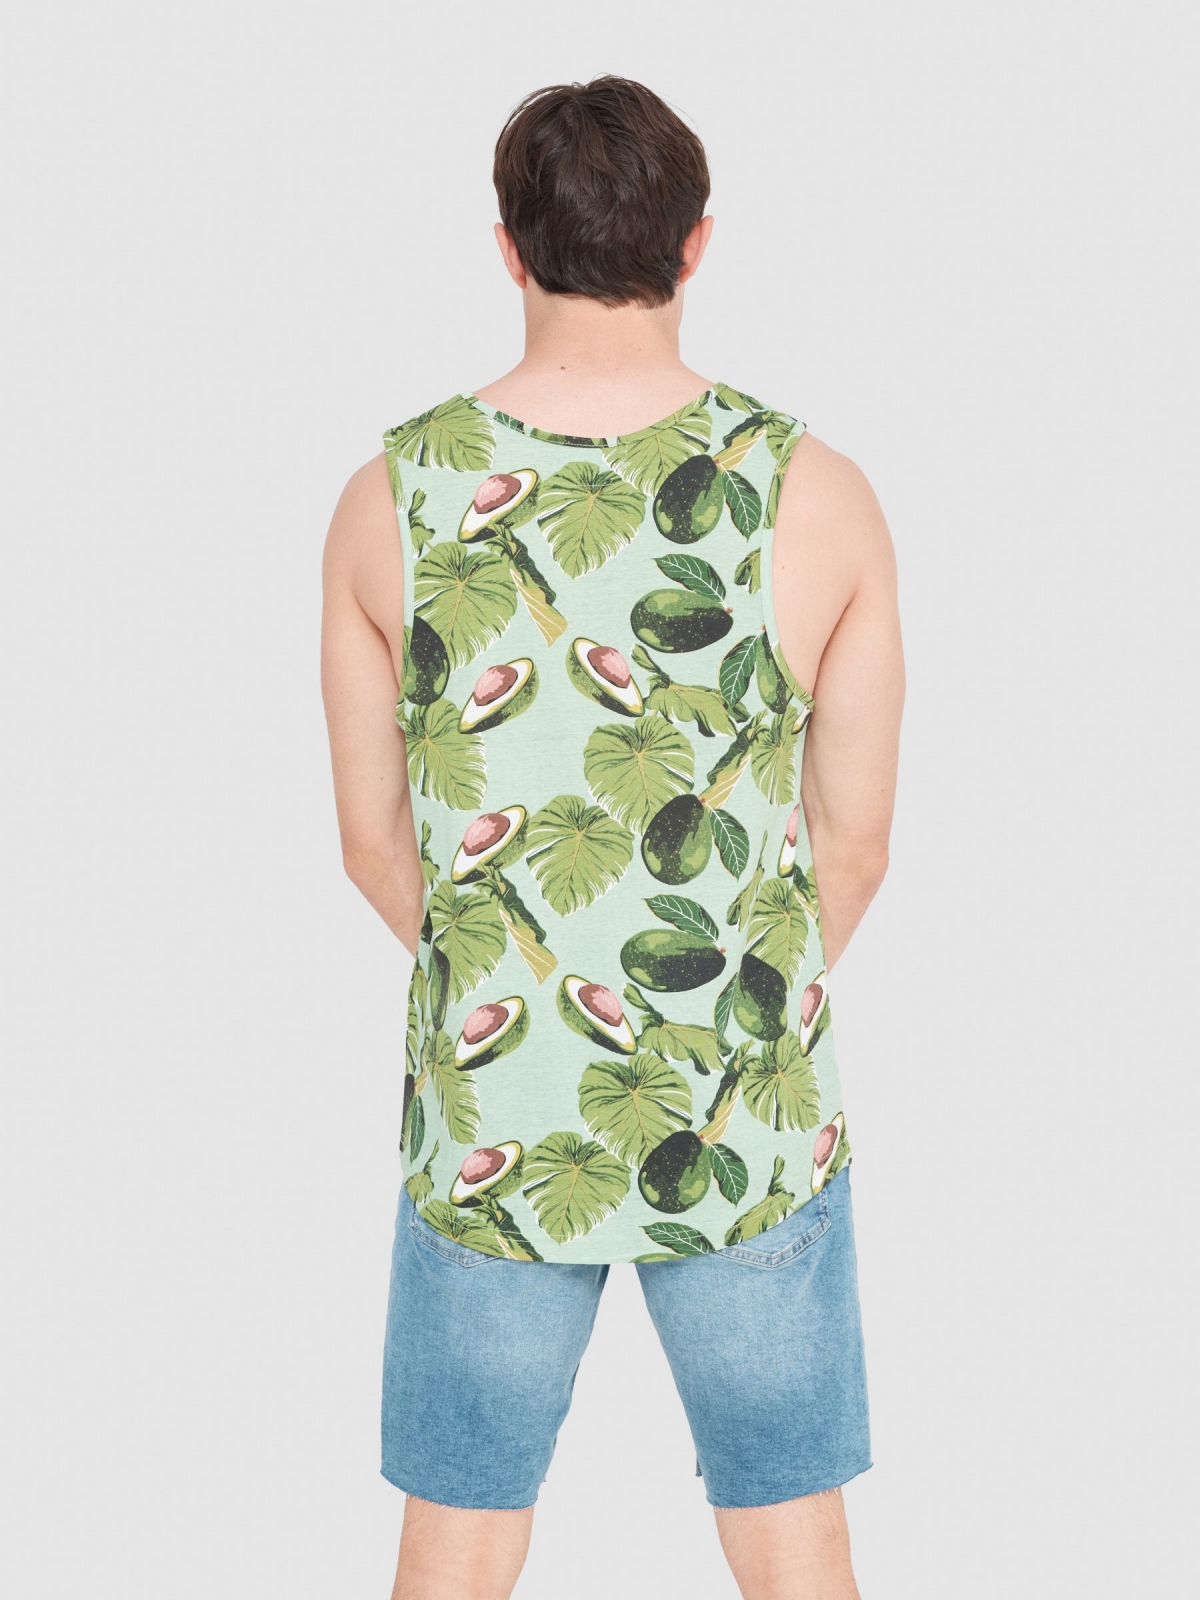 Avocado tank top mint middle back view